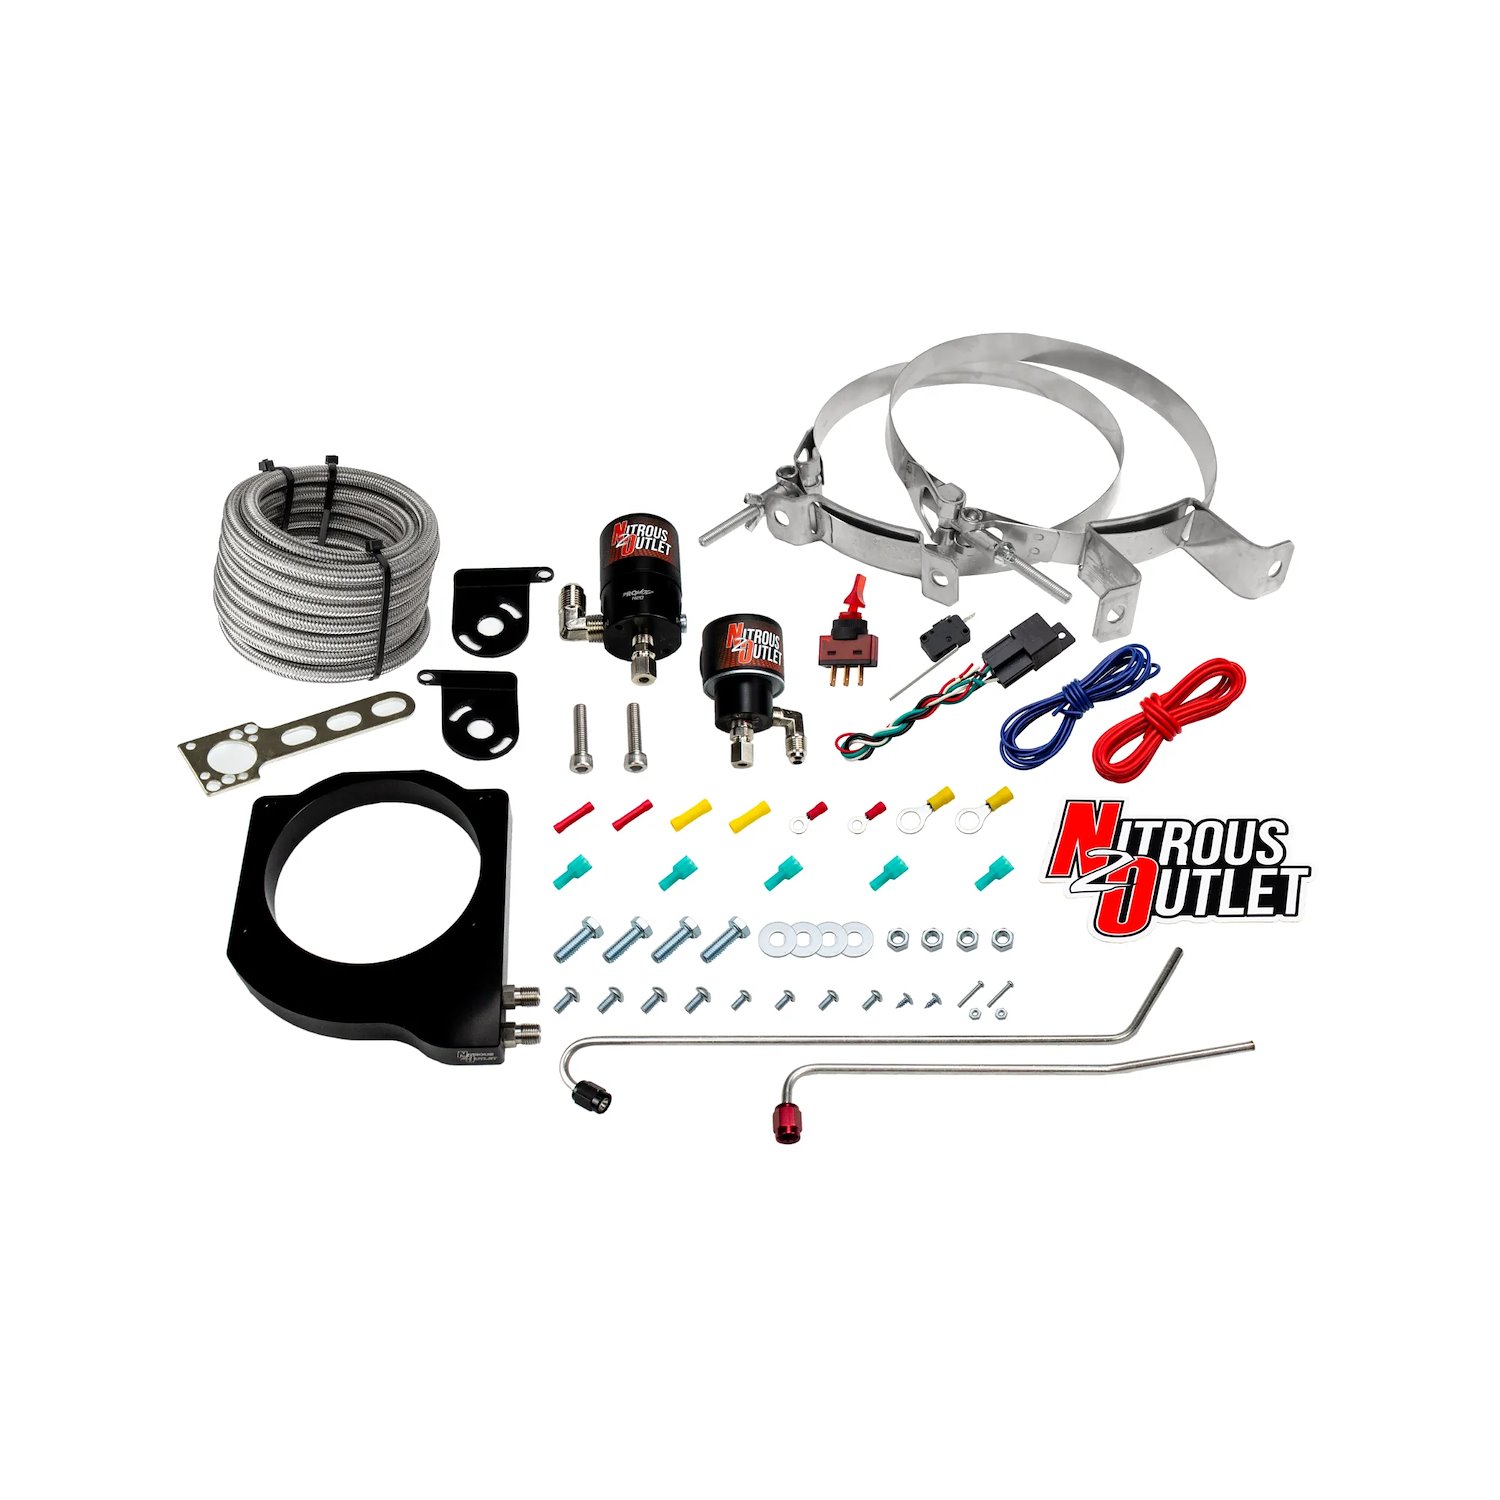 00-10166-00 GM BTR Equalizer 1 LS1/LS2 Throttle Body Plate System, Gas/E85, 5-55 psi, 50-200hp, No Bottle